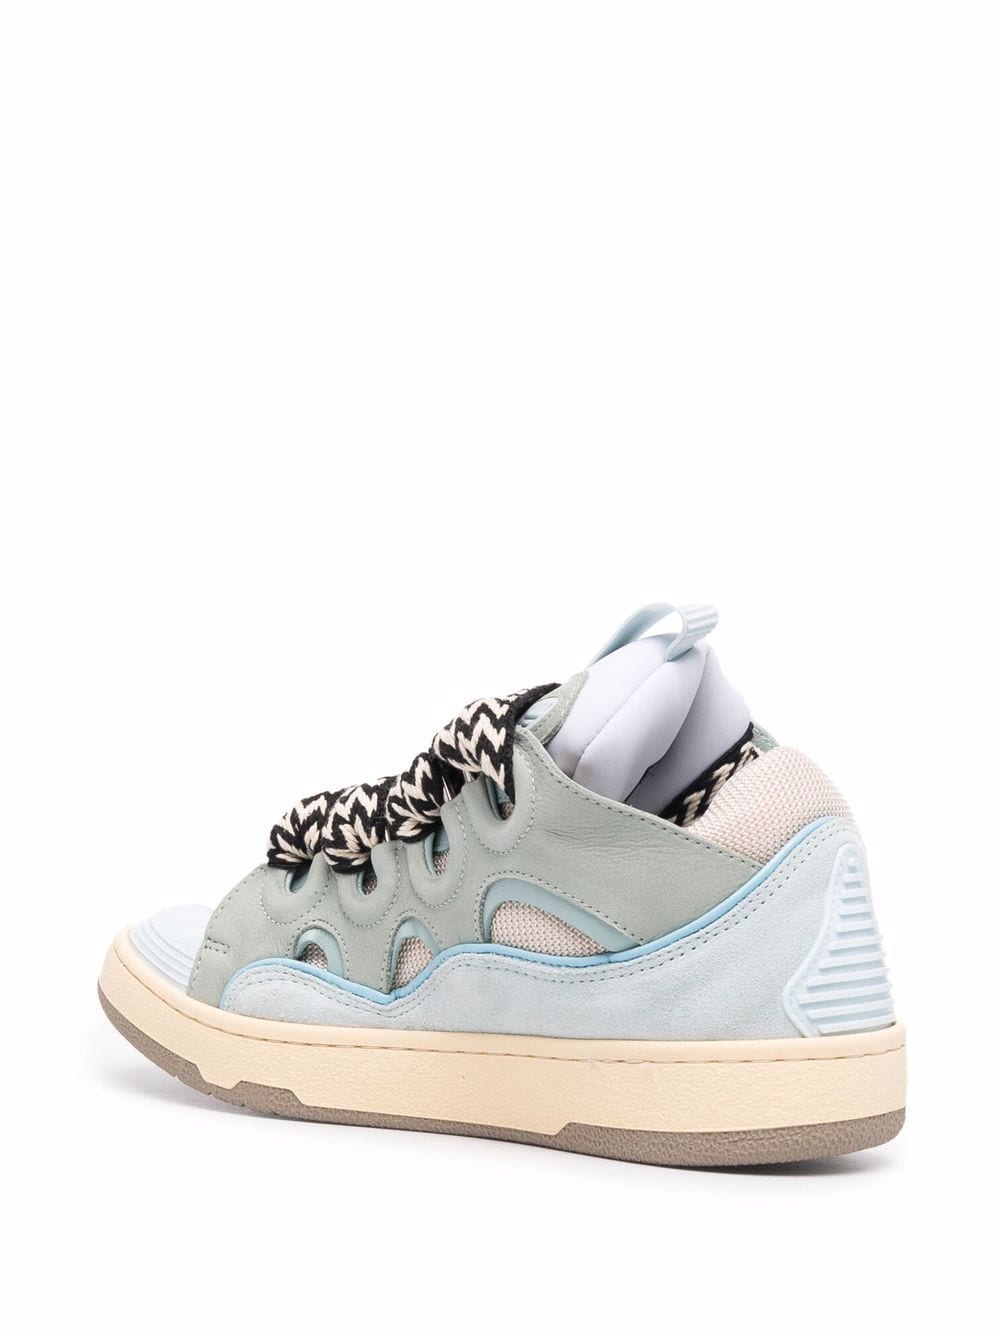 Lanvin Curb lace-up Sneakers - Farfetch